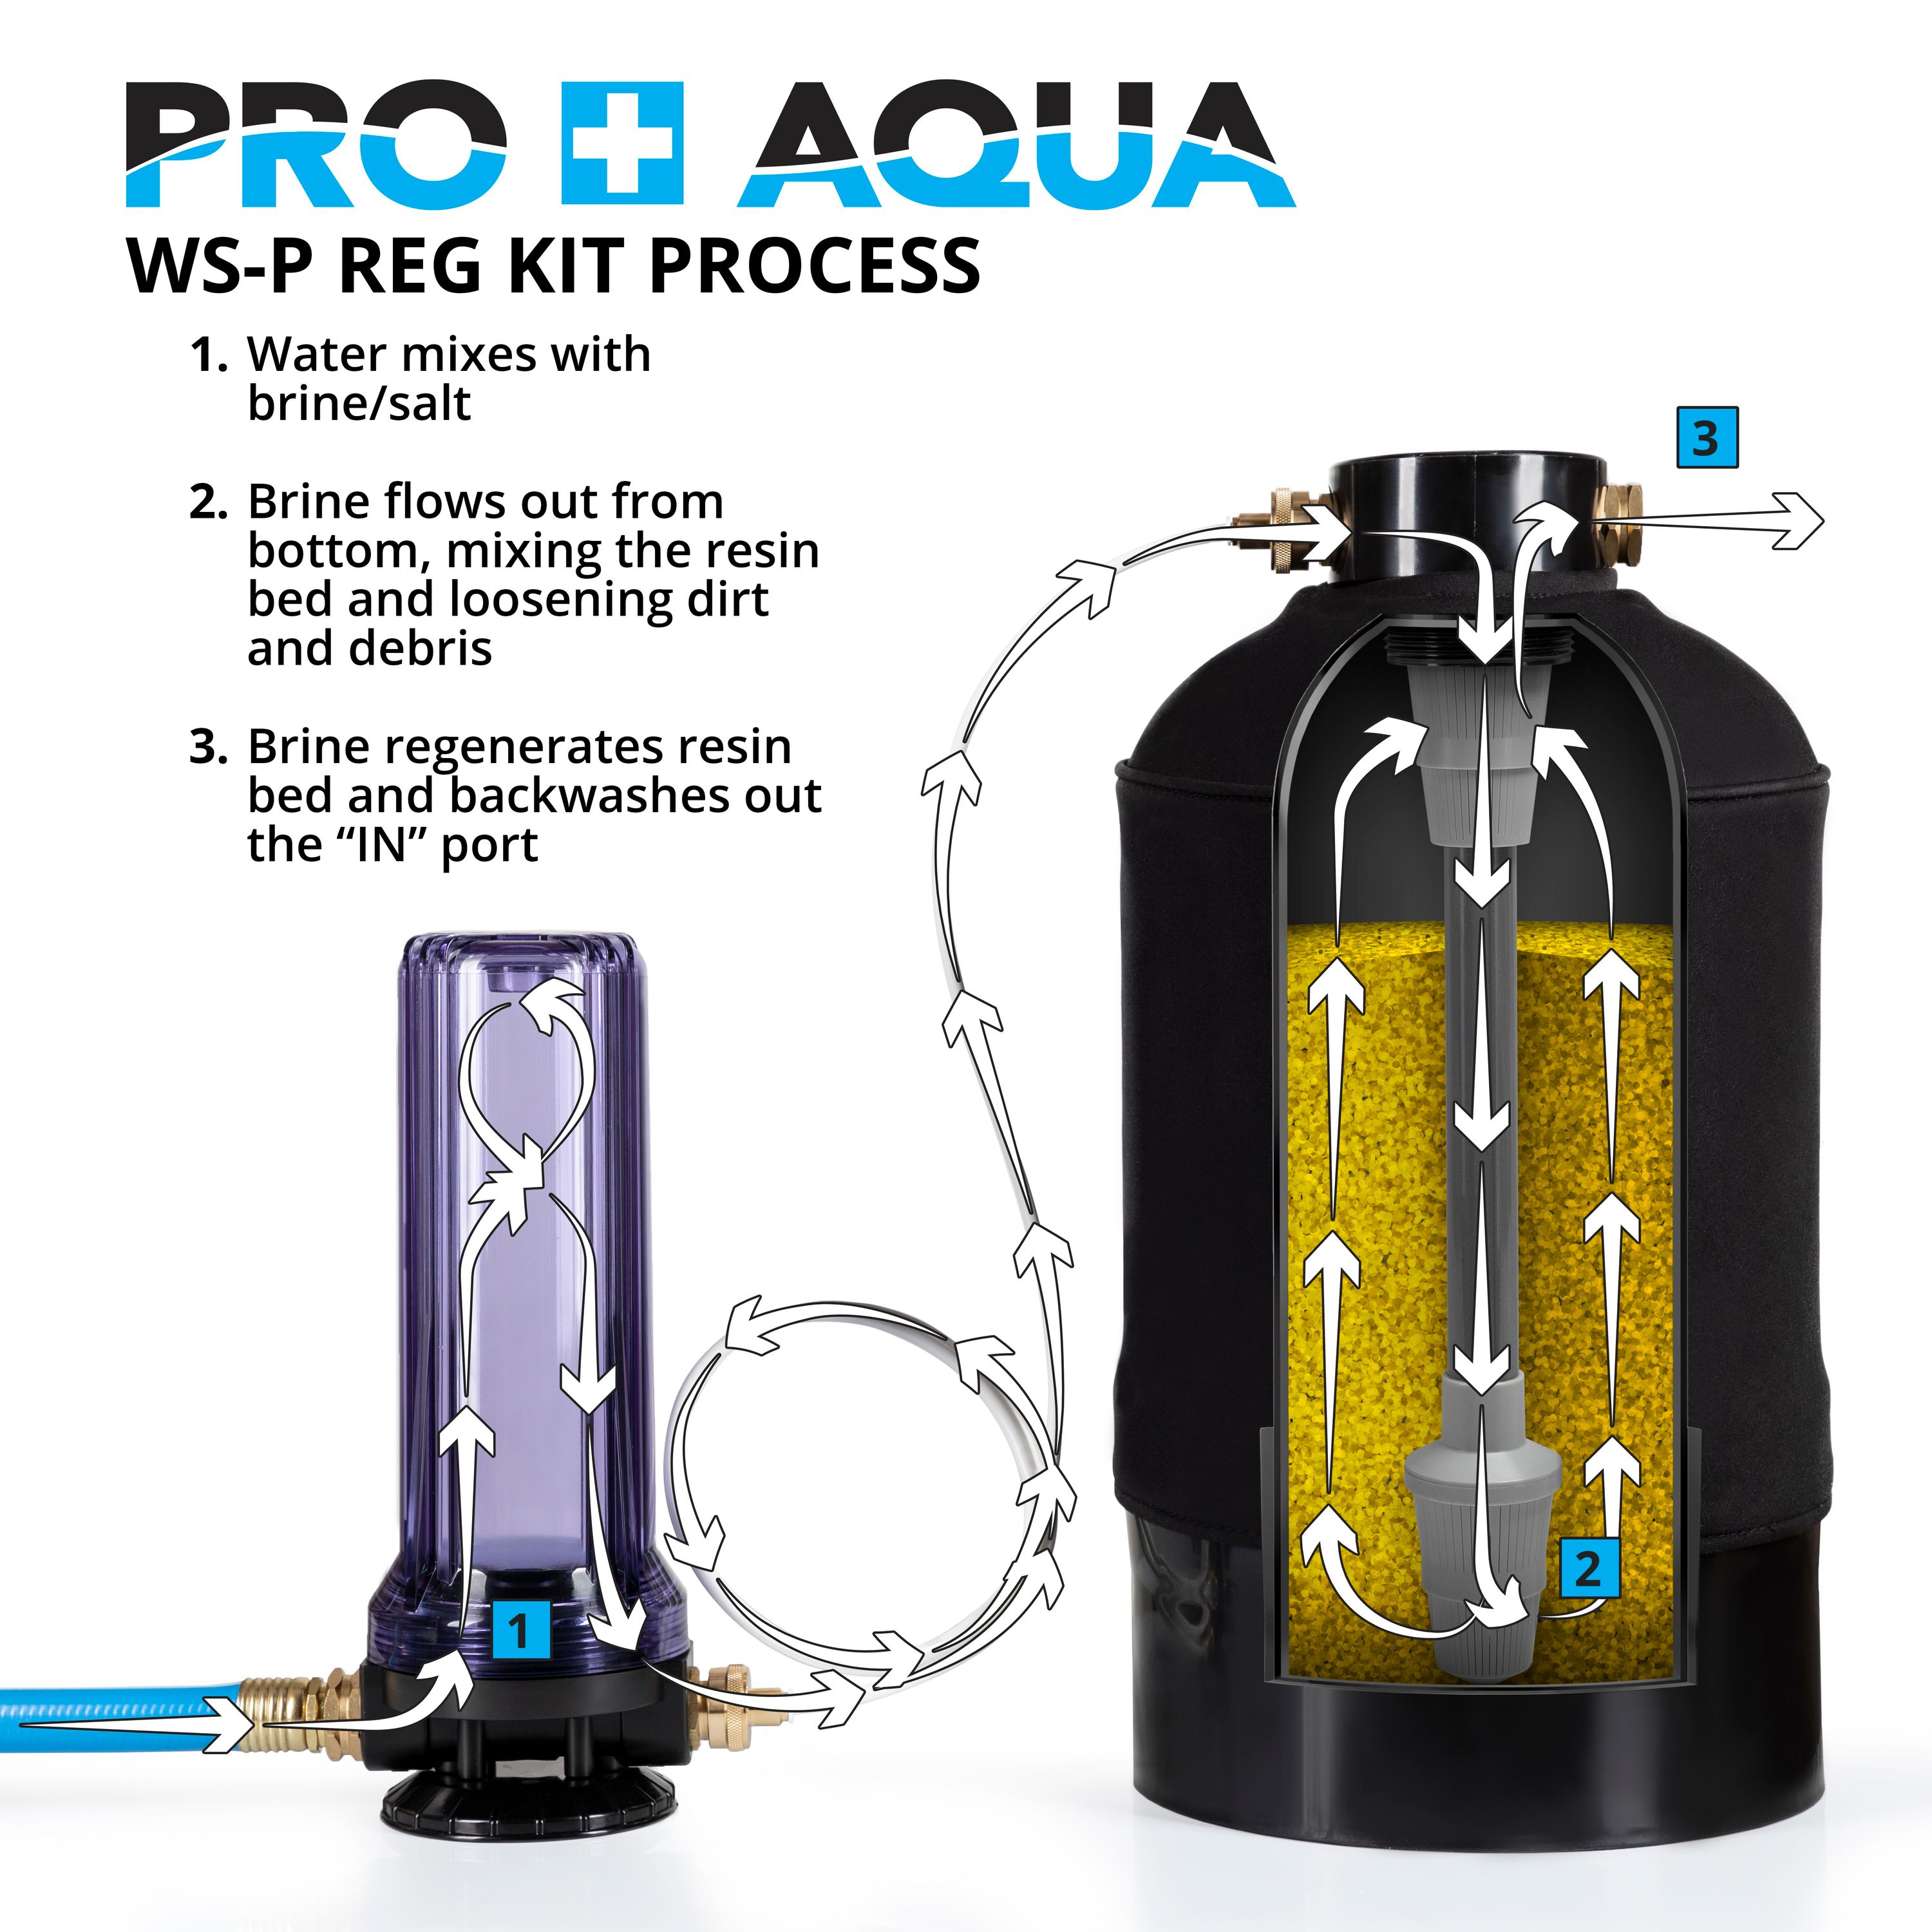 Standard Tank Mounting Bracket - On The Go - Portable Water Softener